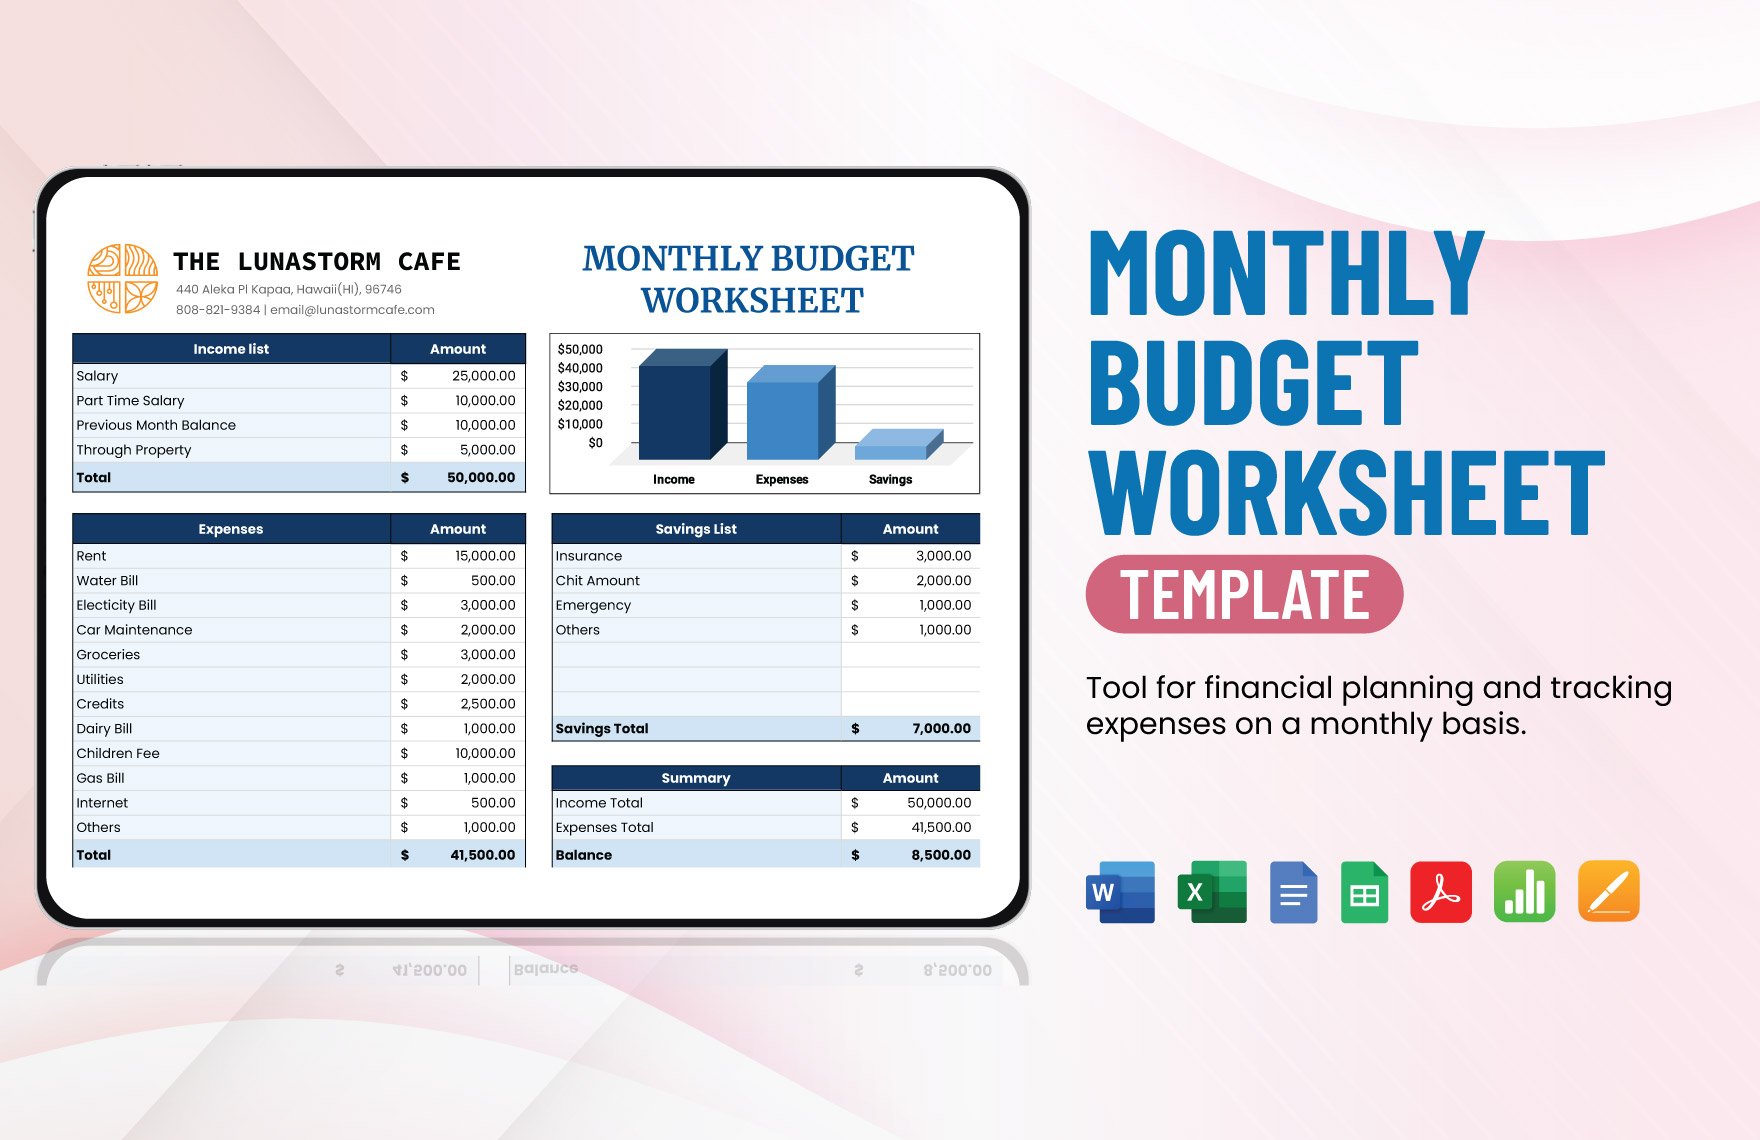 Monthly Budget Worksheet Template in Word, Google Docs, Excel, PDF, Google Sheets, Apple Pages, Apple Numbers